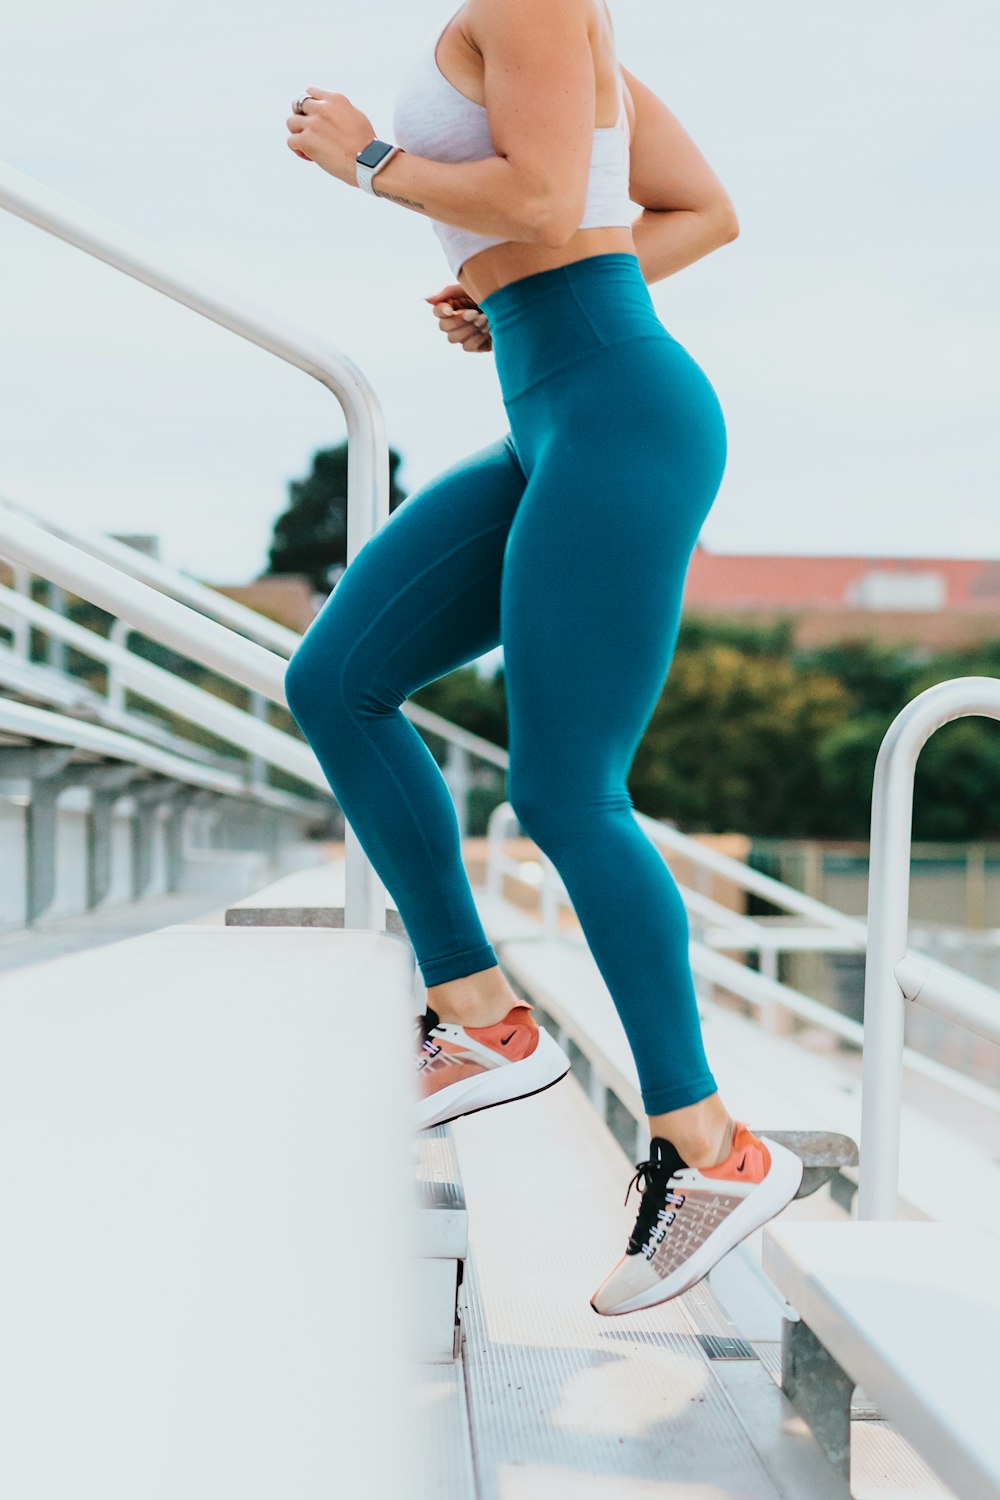 Fitness Wear Pictures | Download Free Images on Unsplash